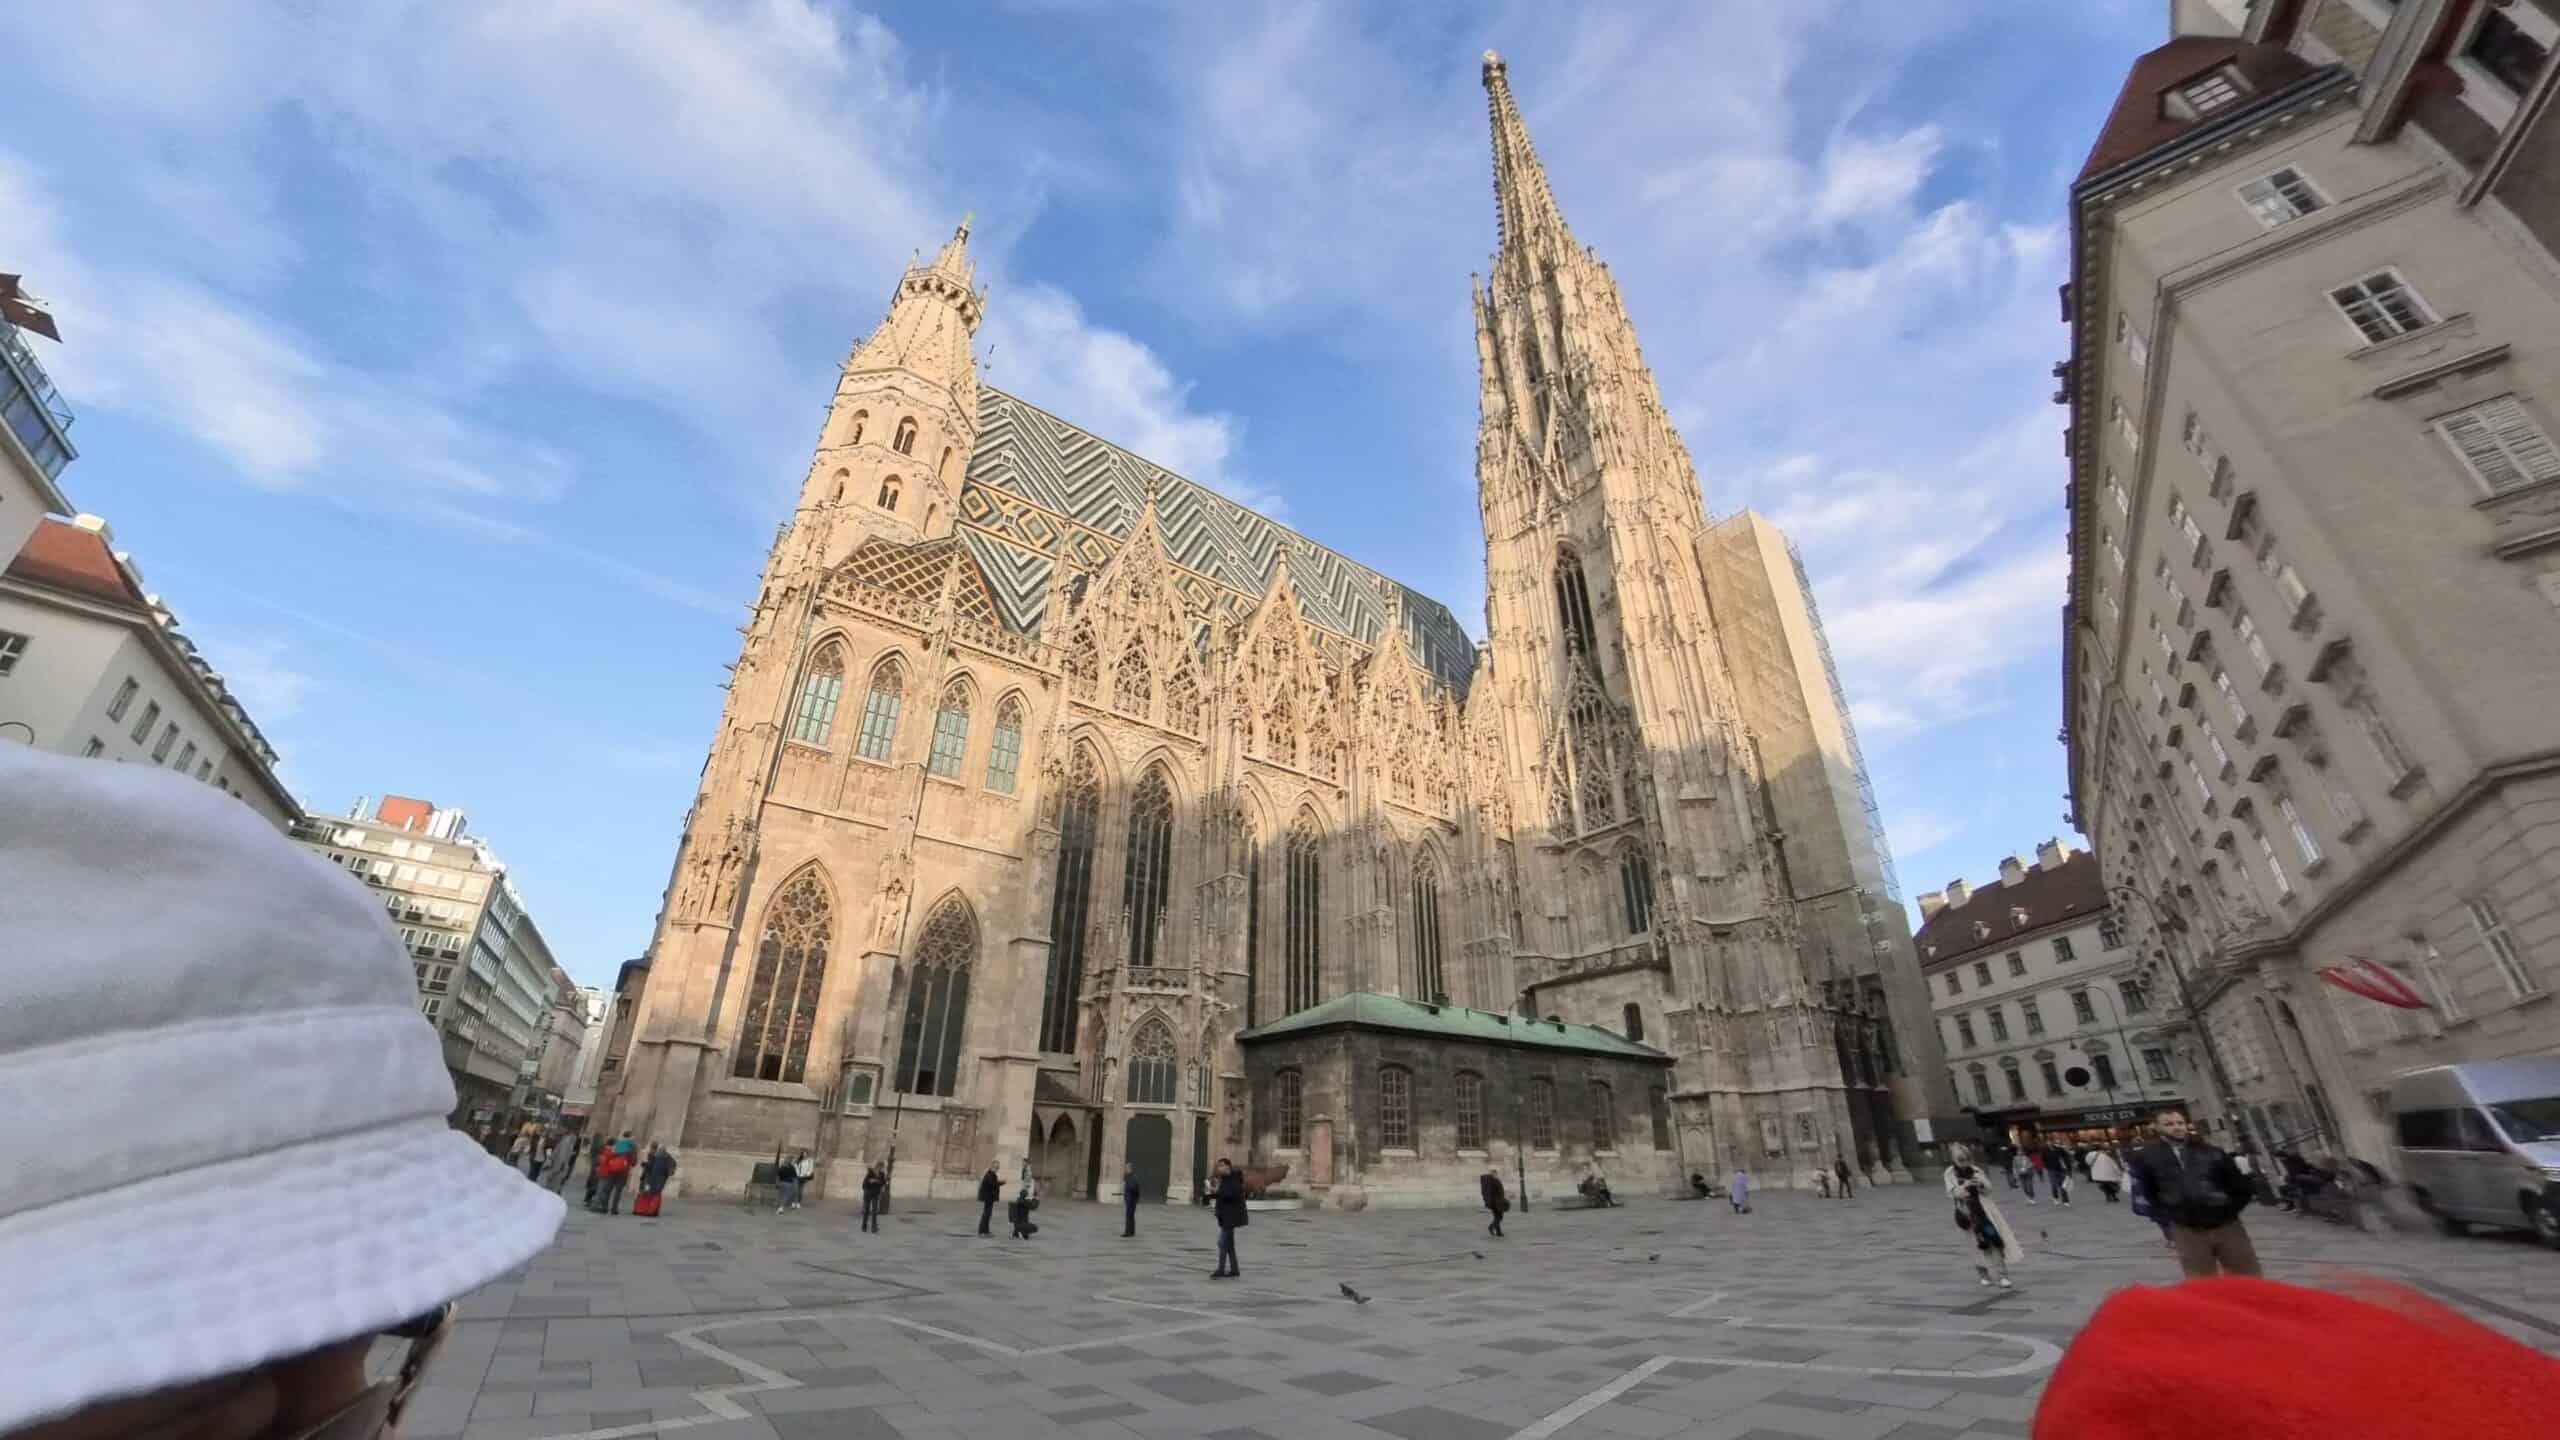 tour St Stephens Cathedral in vienna old town